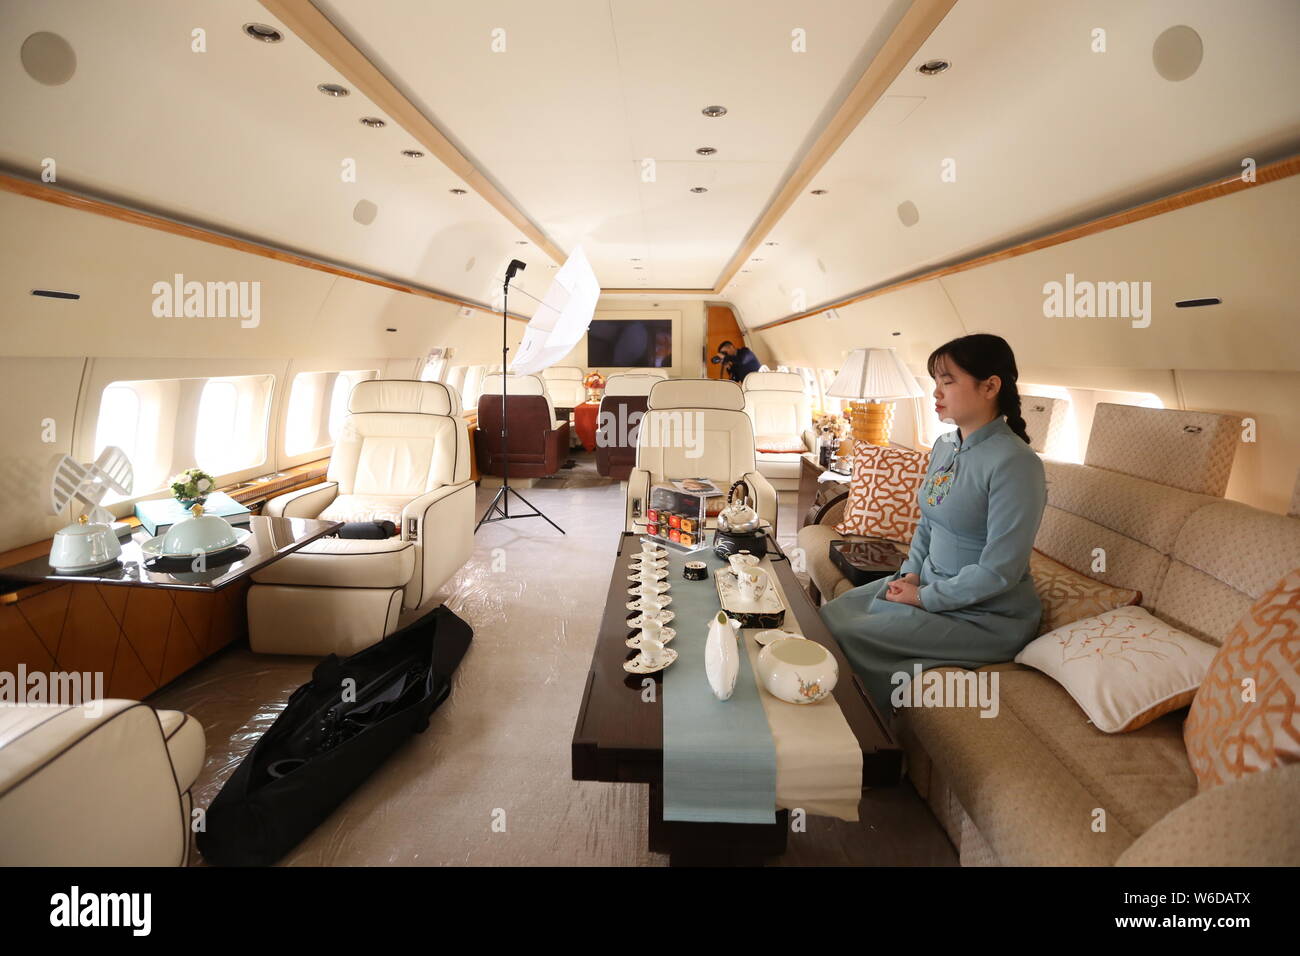 Private Business Jet Inside, Interior Stock Image - Image of knife,  service: 220336595